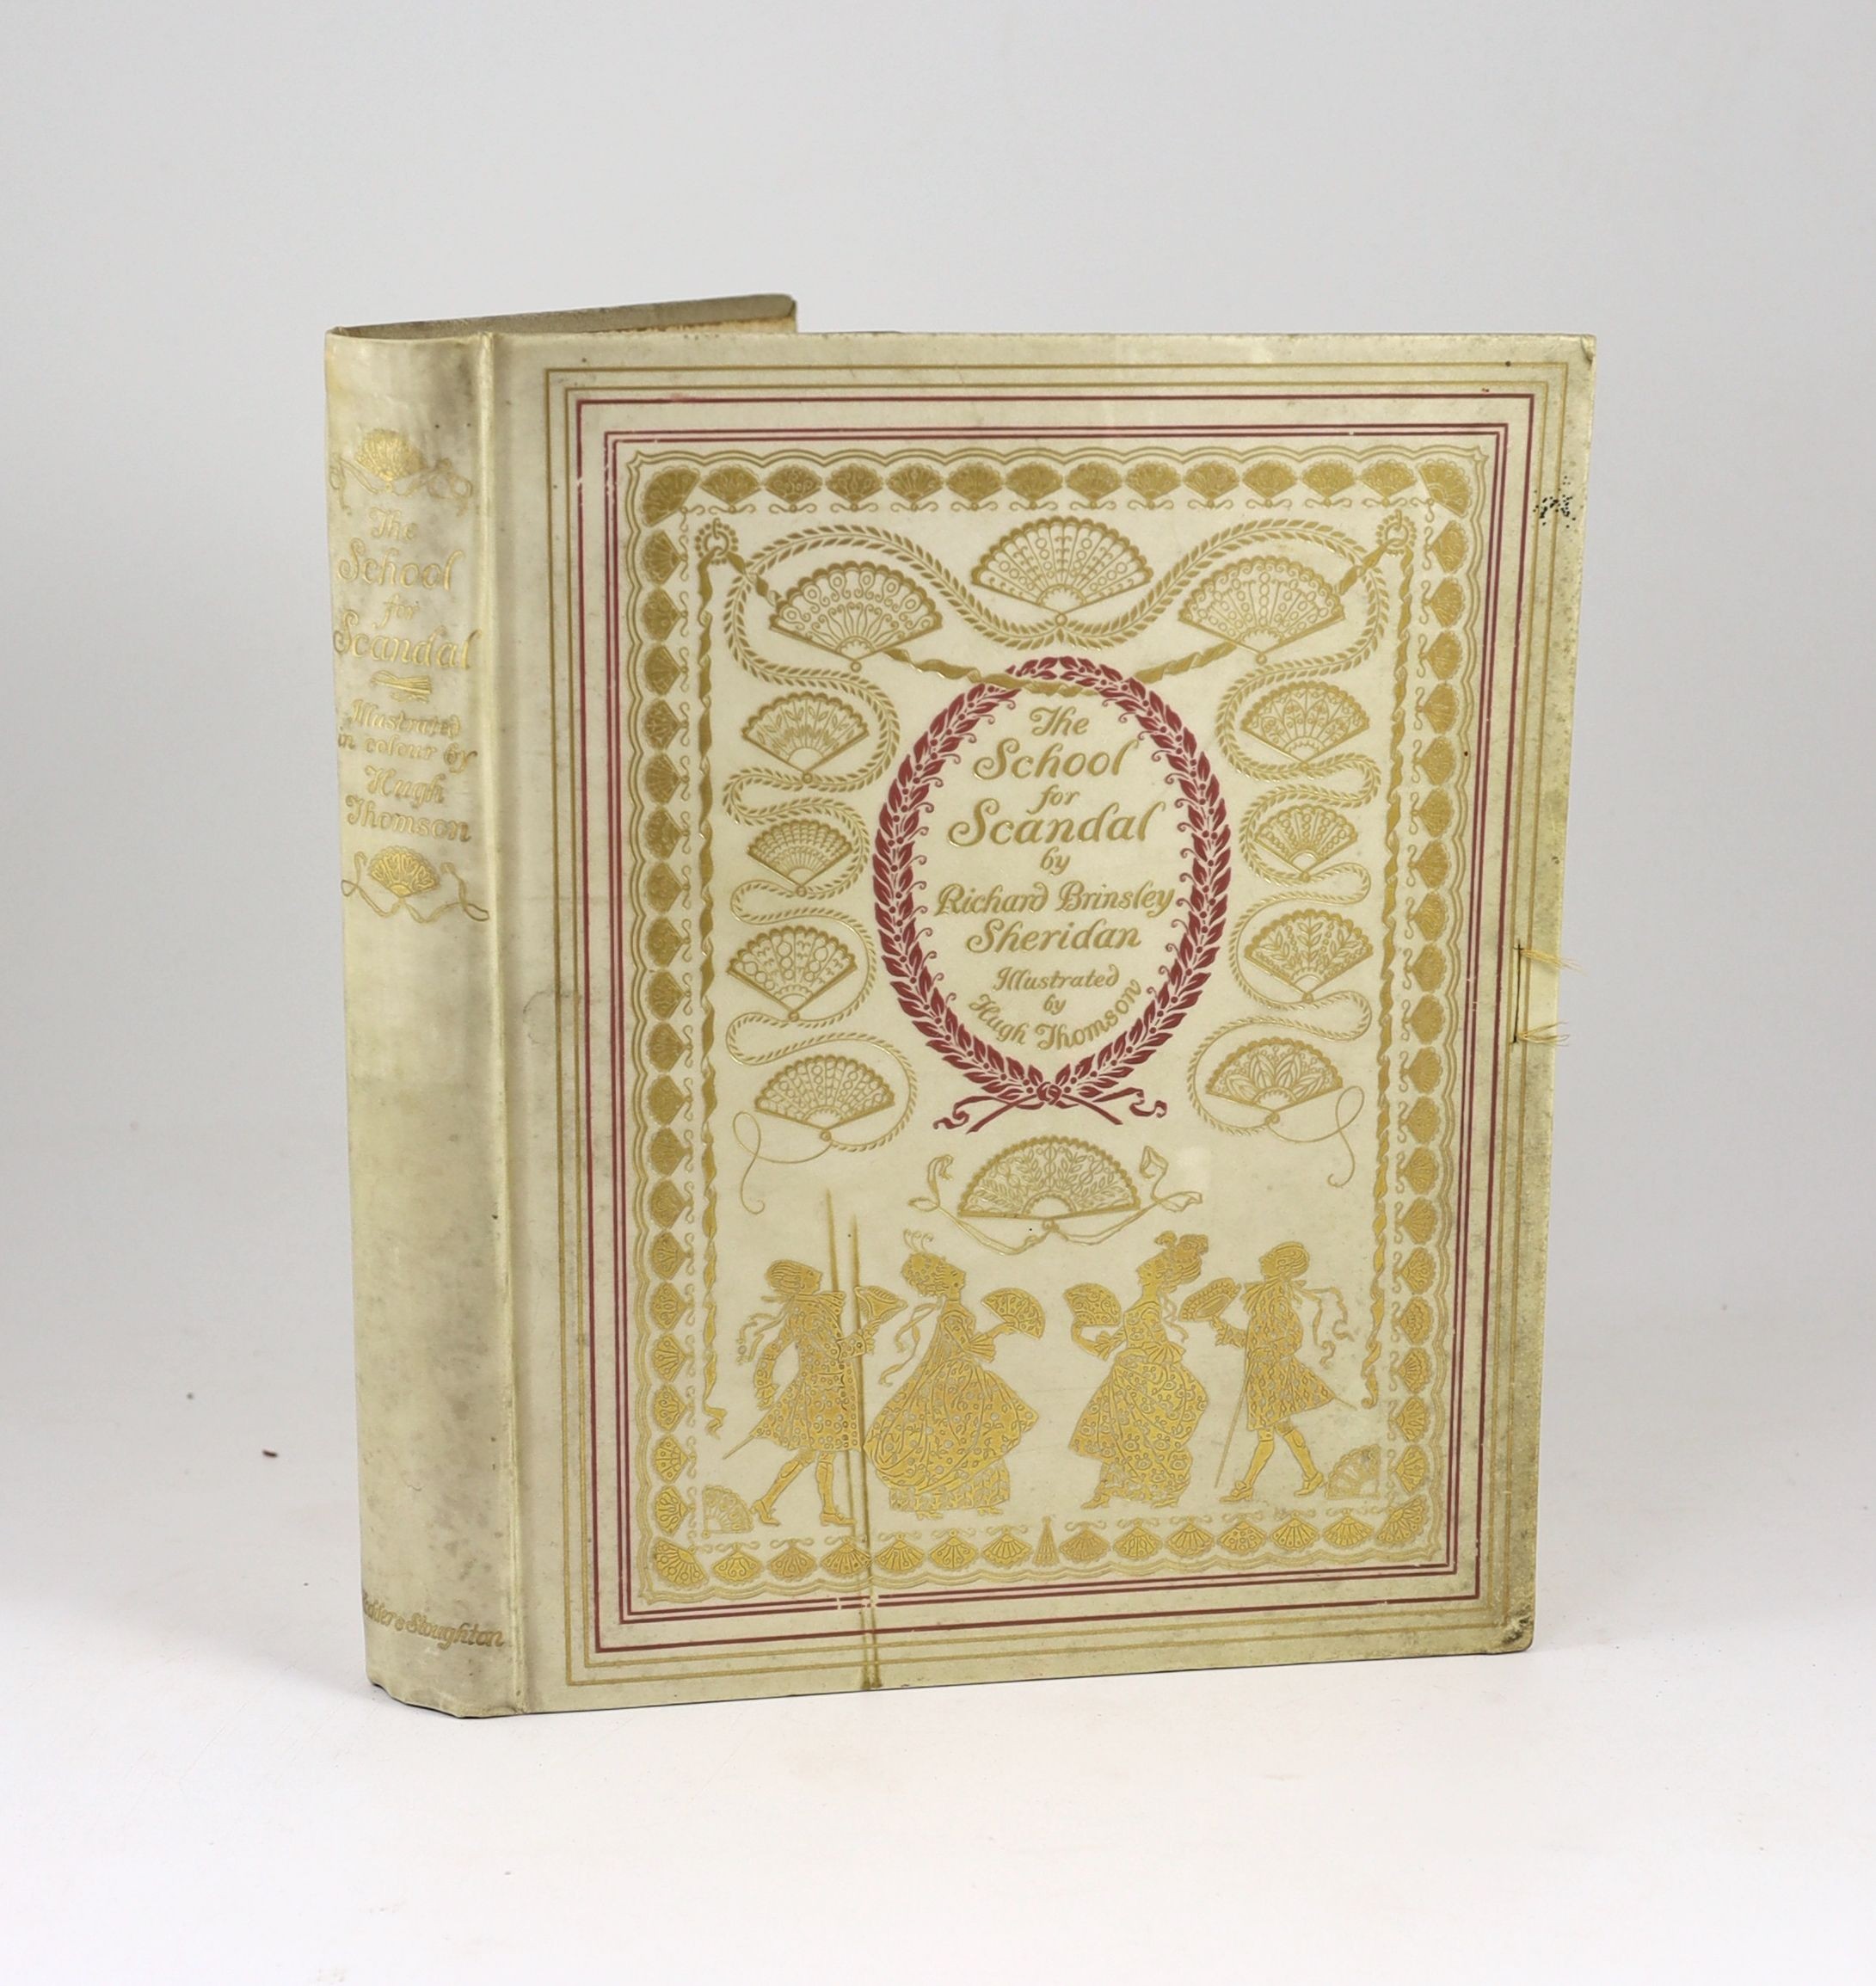 Sheridan, Richard Brinsley - The School for Scandal,de luxe edition, one of 350, signed and illustrated with 25 tipped-in colour plates by Hugh Thomson, folio, pictorial gilt vellum, Hodder and Stoughton, London, c.1911